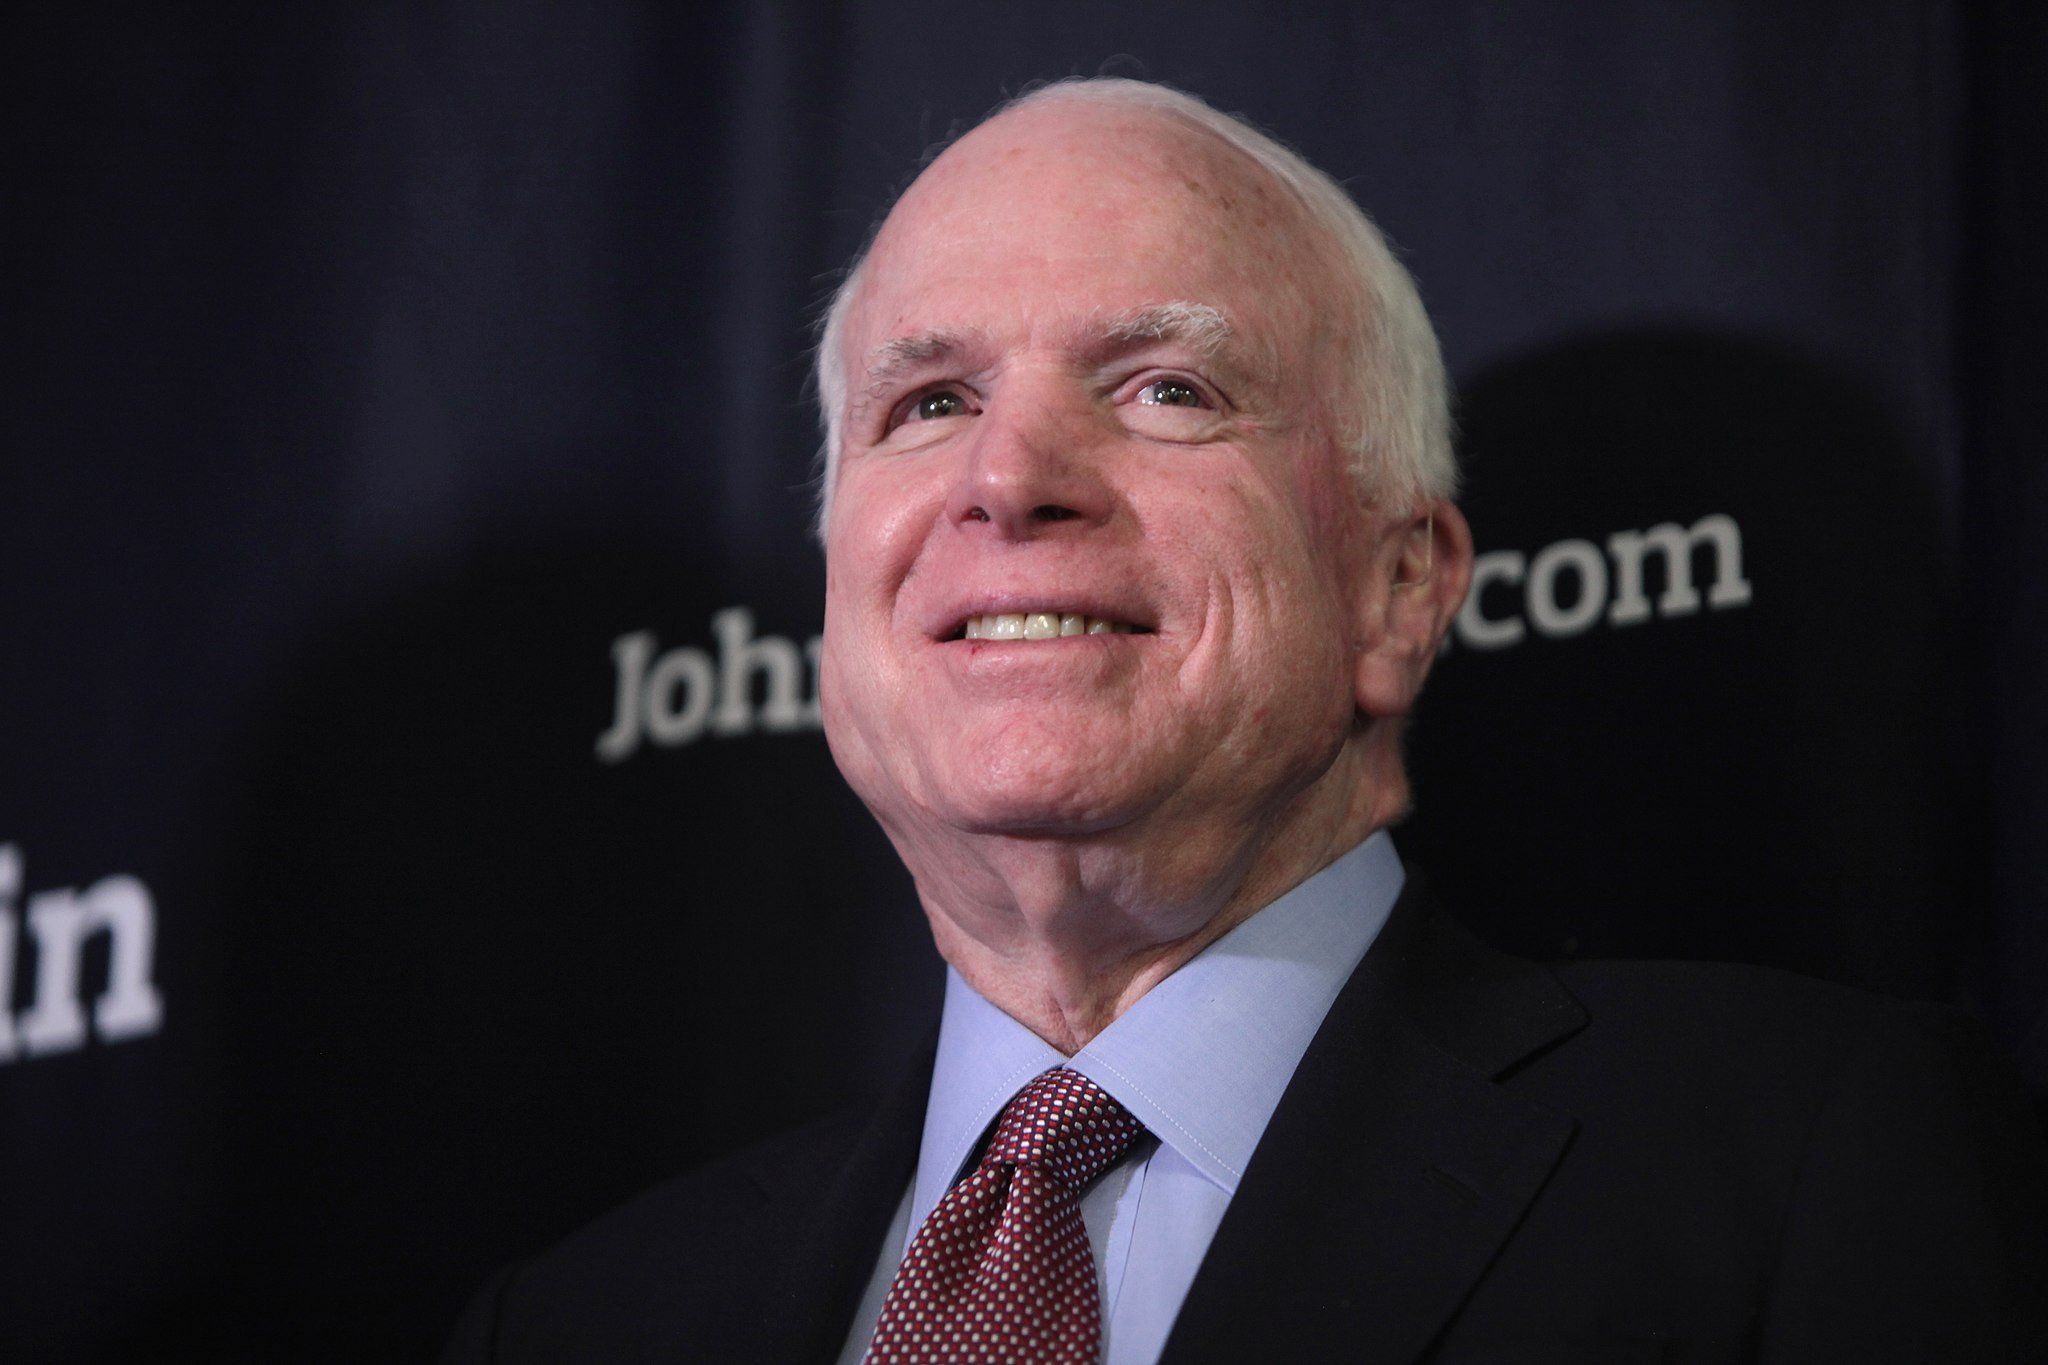 John mccain calls wife a cunt Quality Adult free site compilation